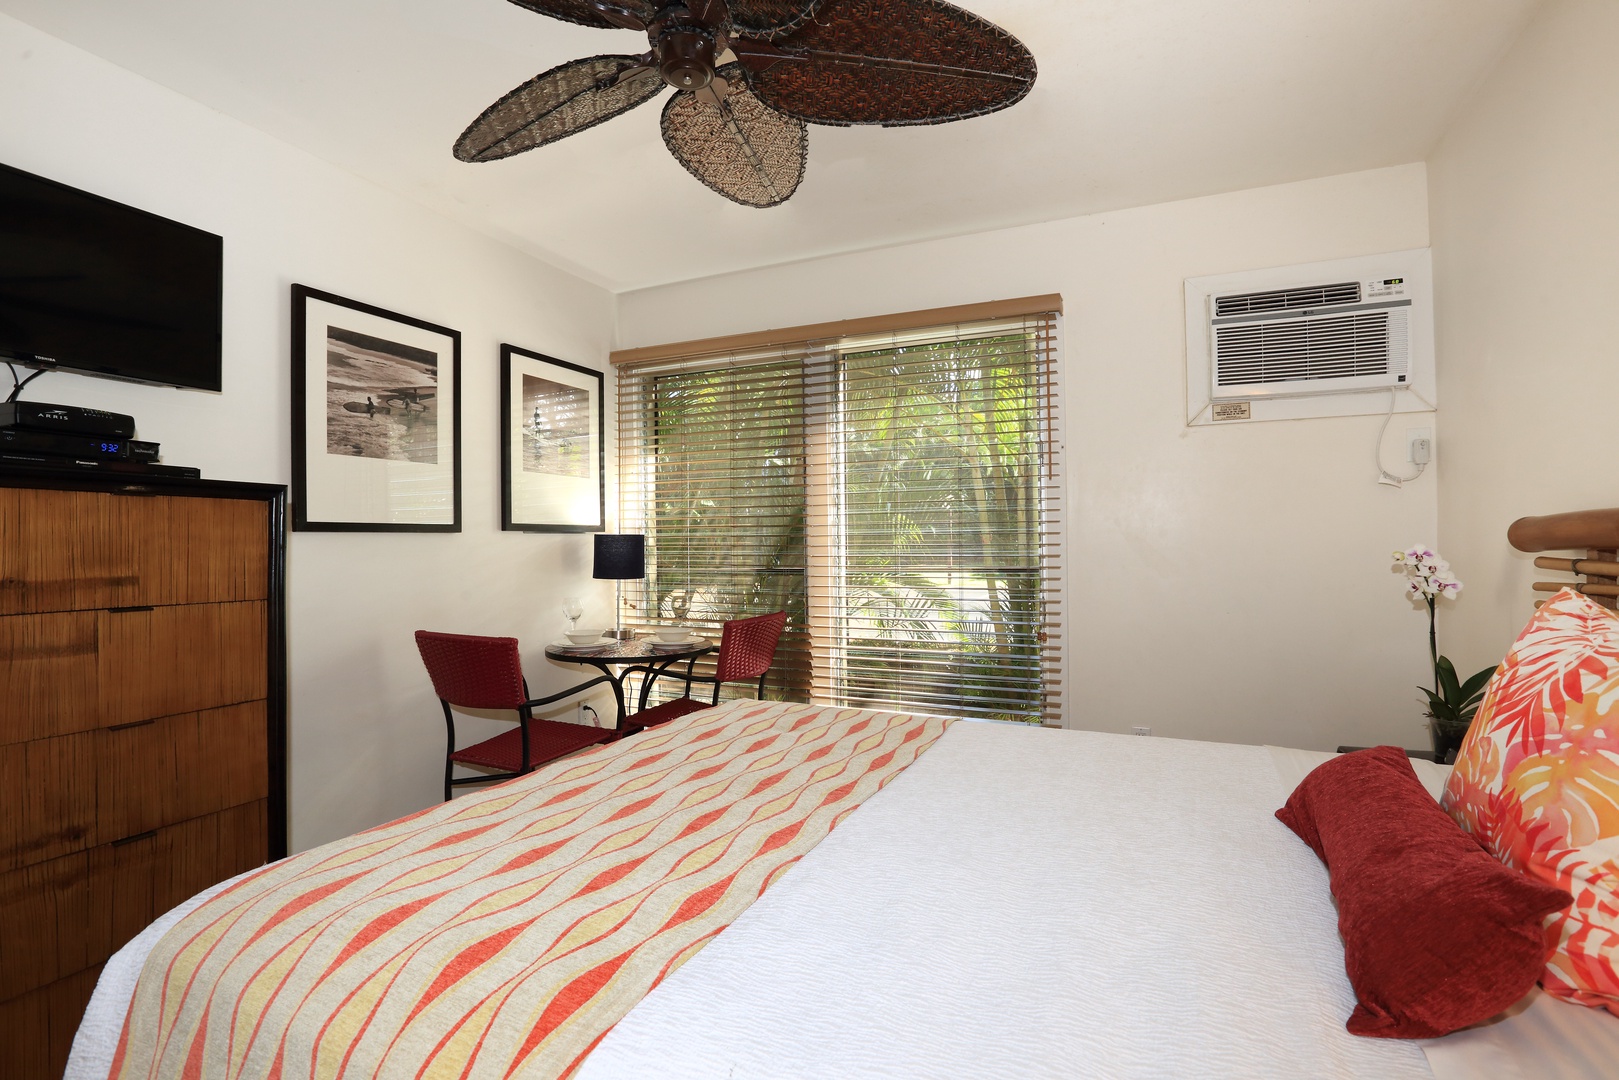 Lahaina Vacation Rentals, Aina Nalu B105 Studio - Tropical decor with modern touches of a flat screen TV and WiFi